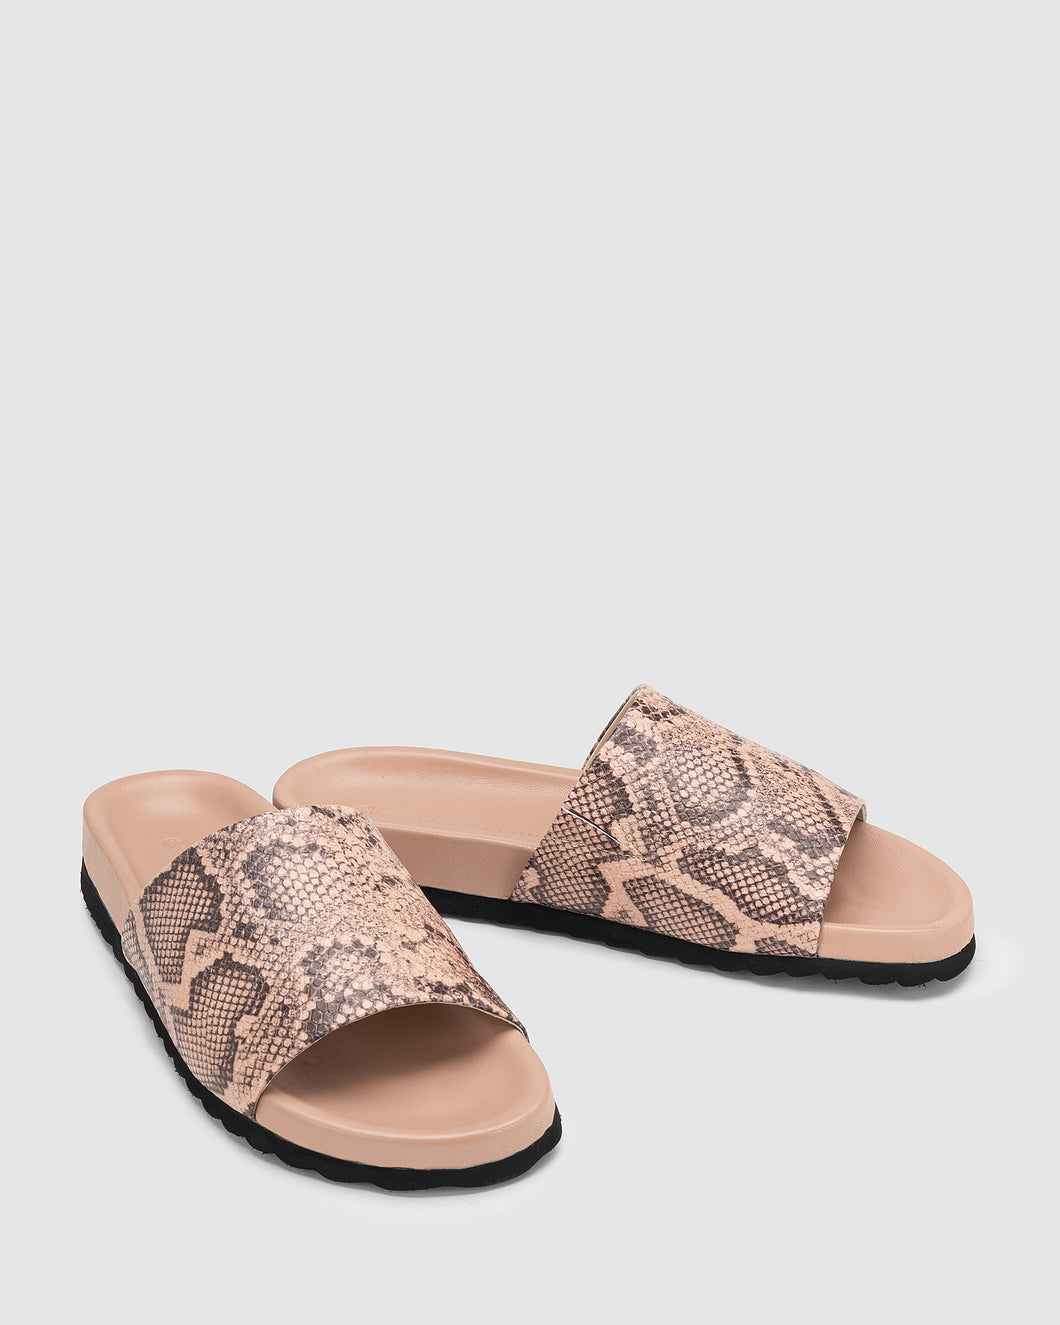 Chaos and Harmony Seclude Slide - Blush Snake  Mrs Hyde Boutique   